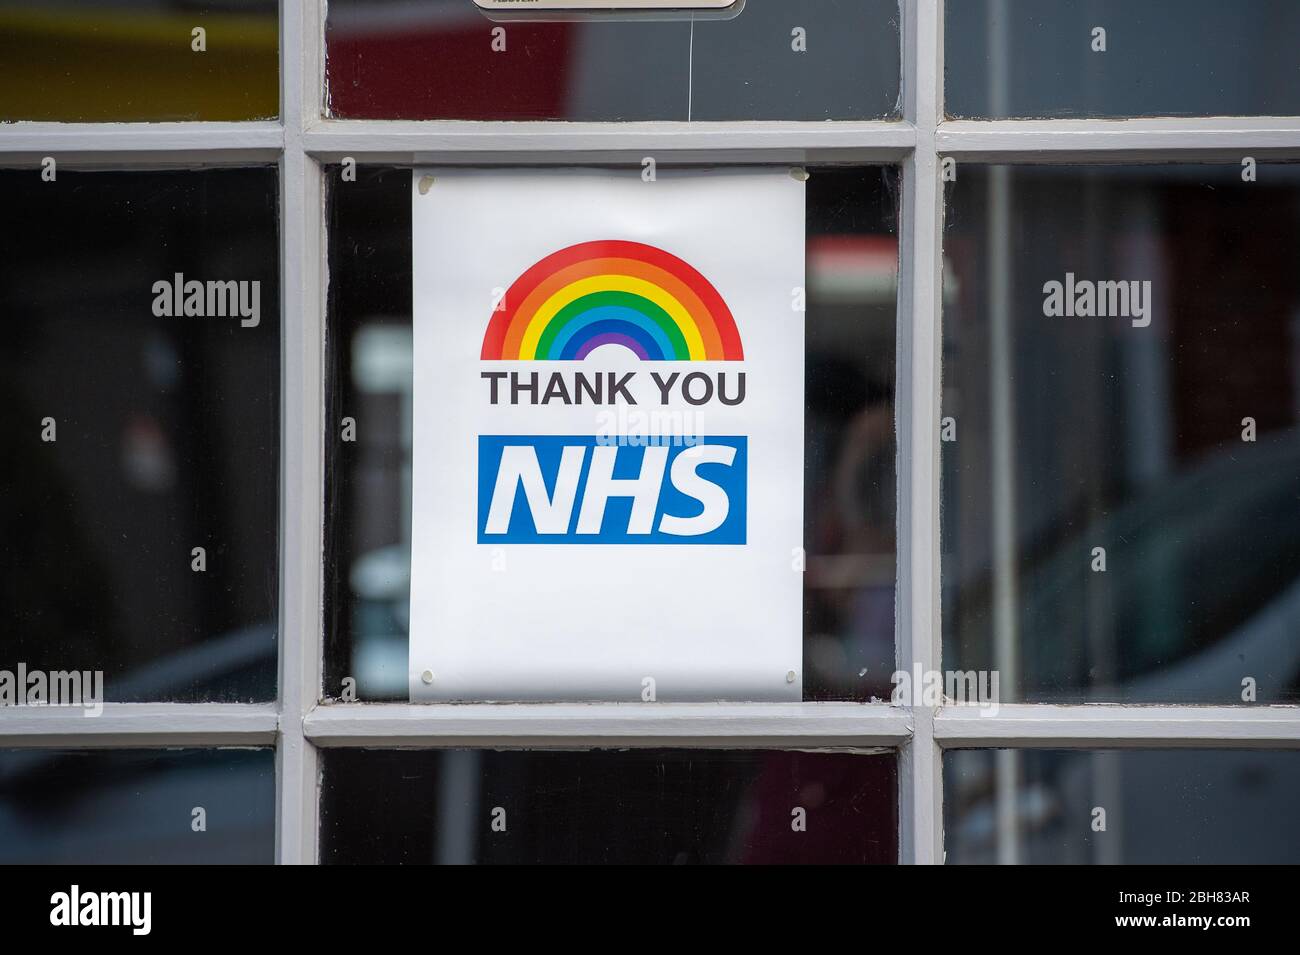 Windsor, Berkshire, UK. 24th April, 2020. Numerous windows in Windsor fill the streets with hope and positivity with children's artwork and drawings thanking the NHS and bringing hope and love to NHS staff, carers and key workers during the Coronavirus Pandemic Lockdown. Credit: Maureen McLean/Alamy Stock Photo